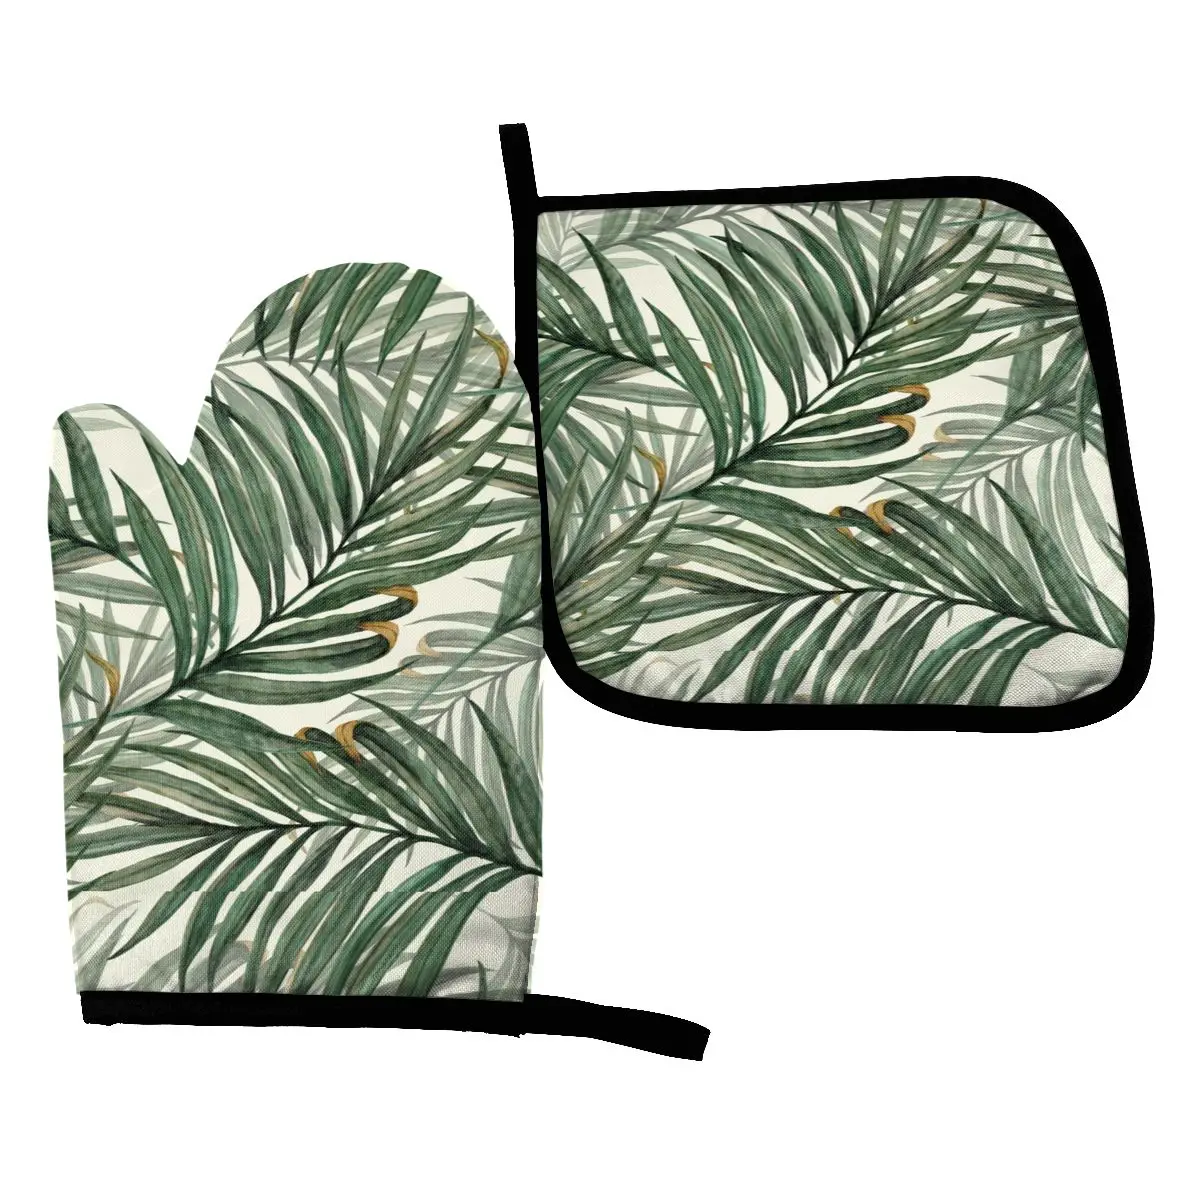 

Forest Kitchen Gloves Oven Cooking Oven Mitts Tropical Monstera Plant Botanical Jungle Banana Green Heatproof Potholder Pad BBQ